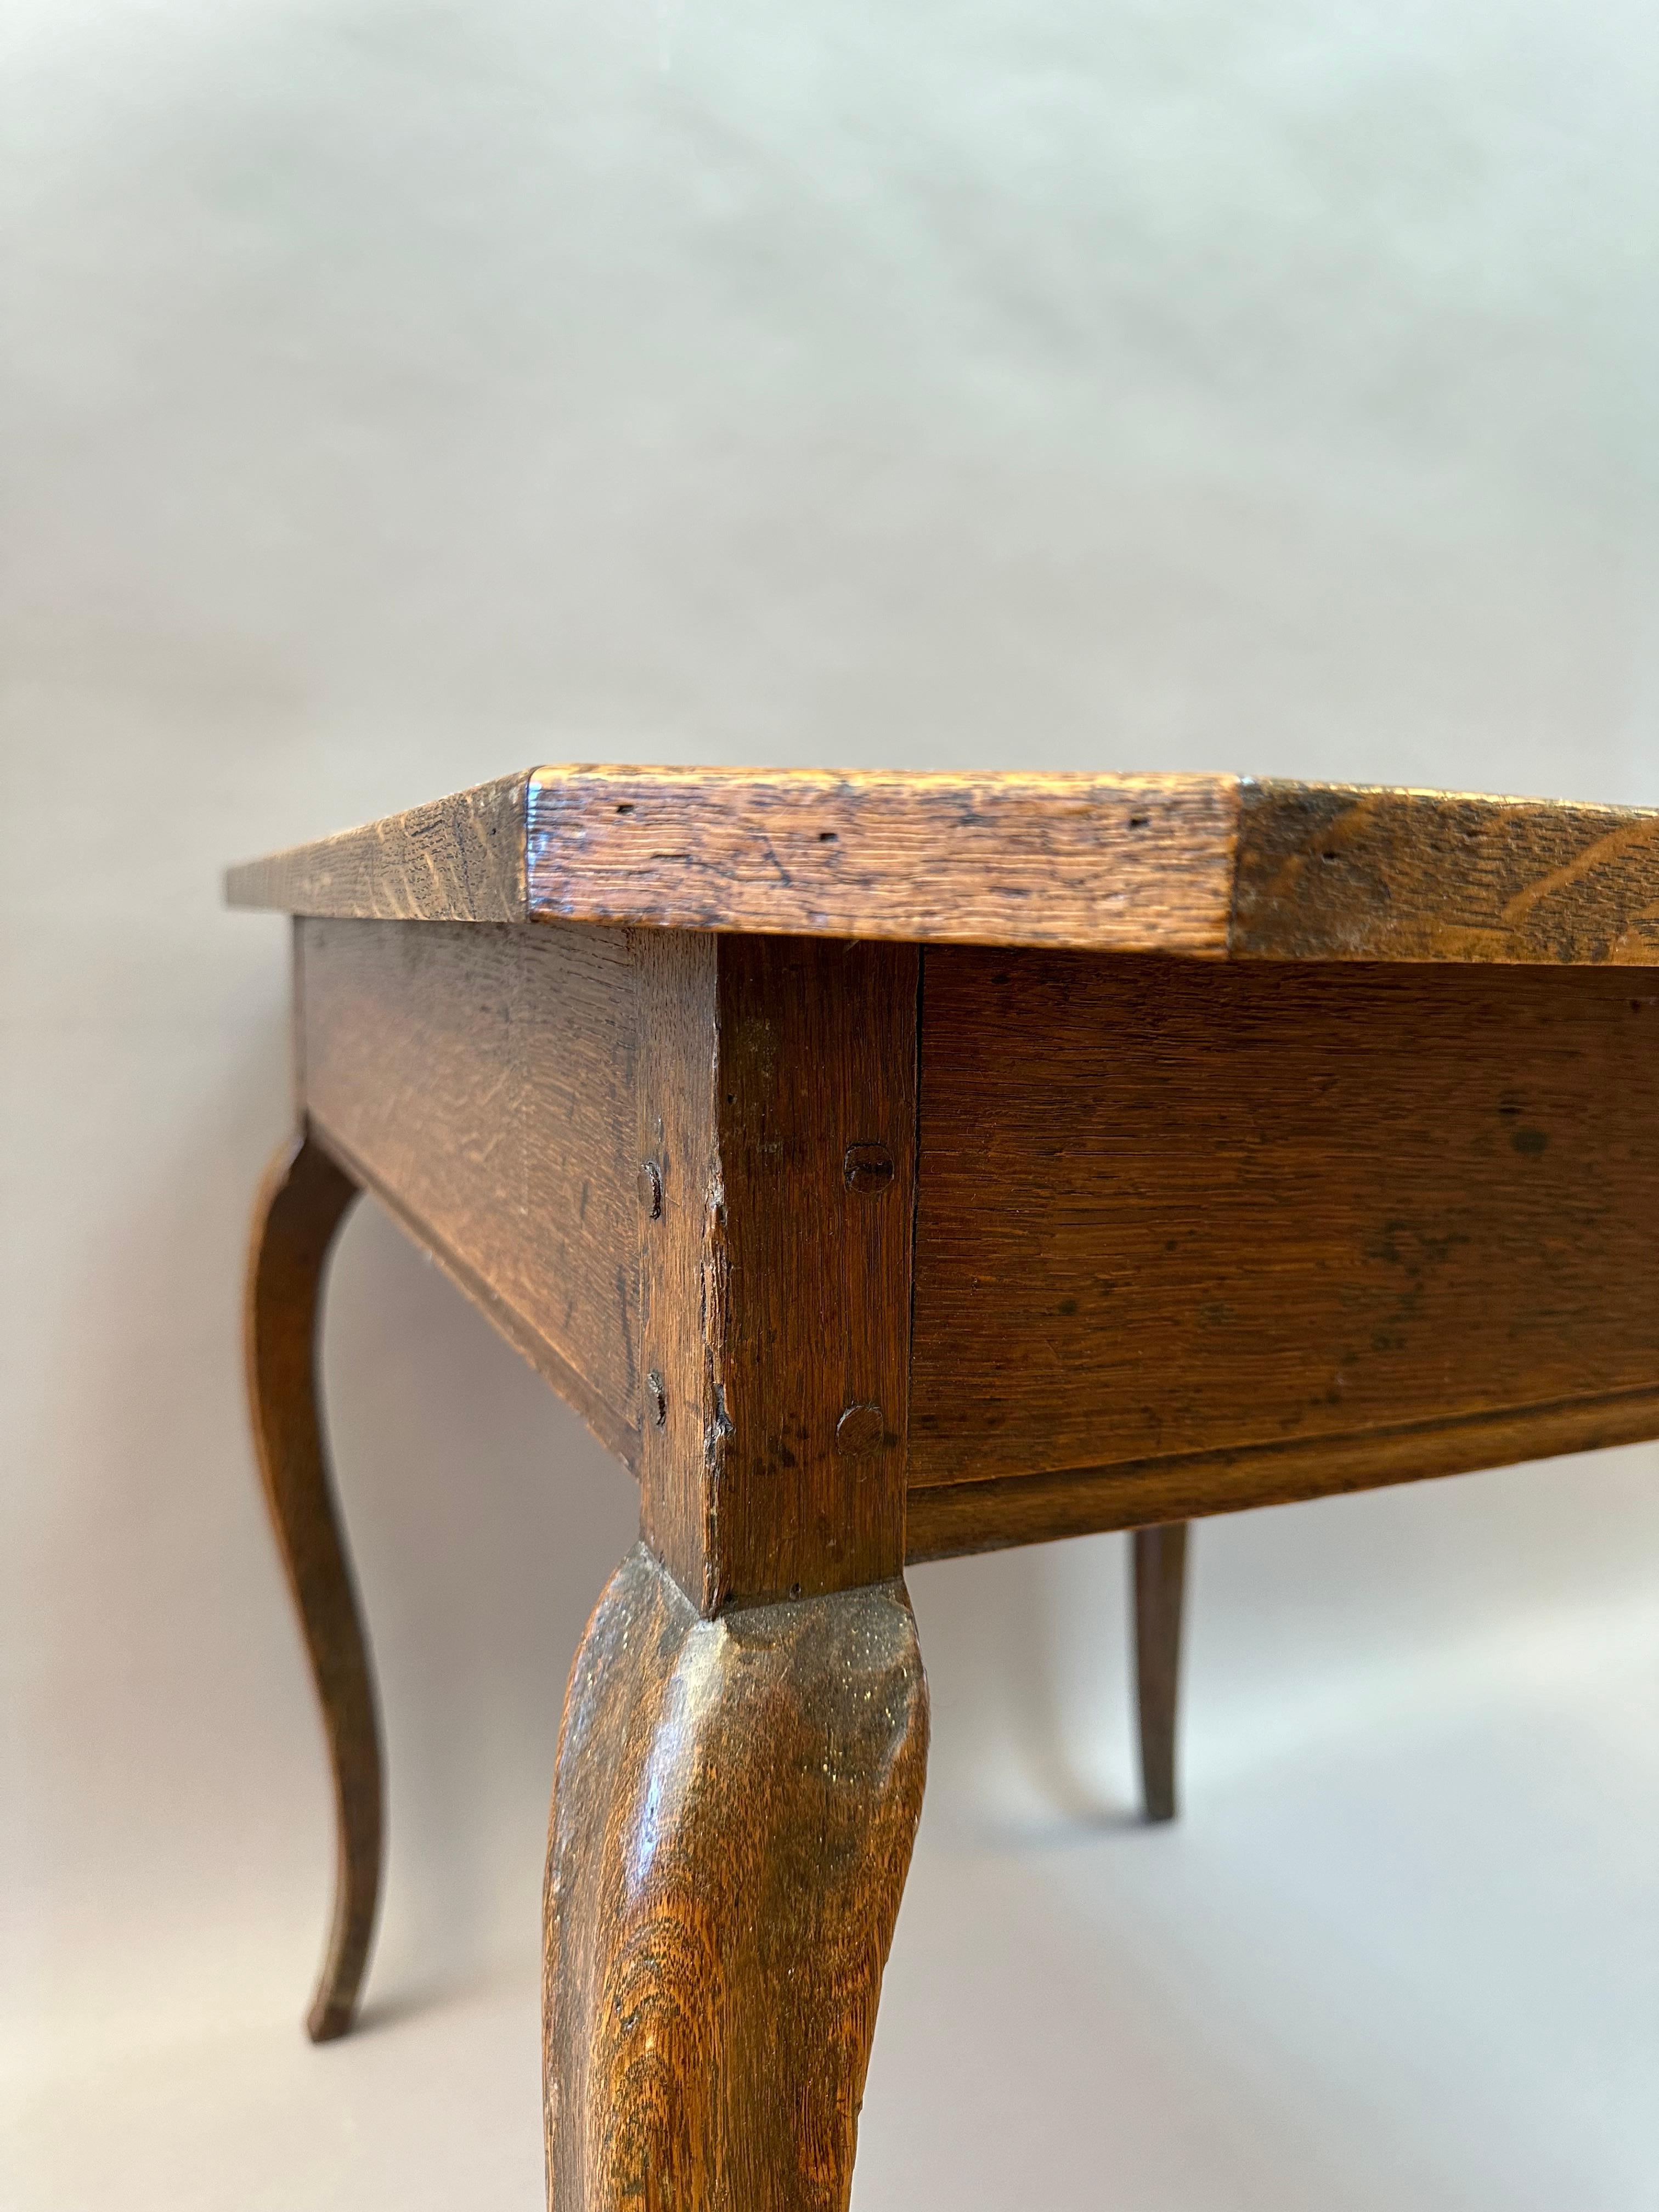 A fine quality 18th century French Provincial games table. Made of richly colored oak with finely shaped cabriole legs, and tooled leather top.  Made in Provence, circa 1780.